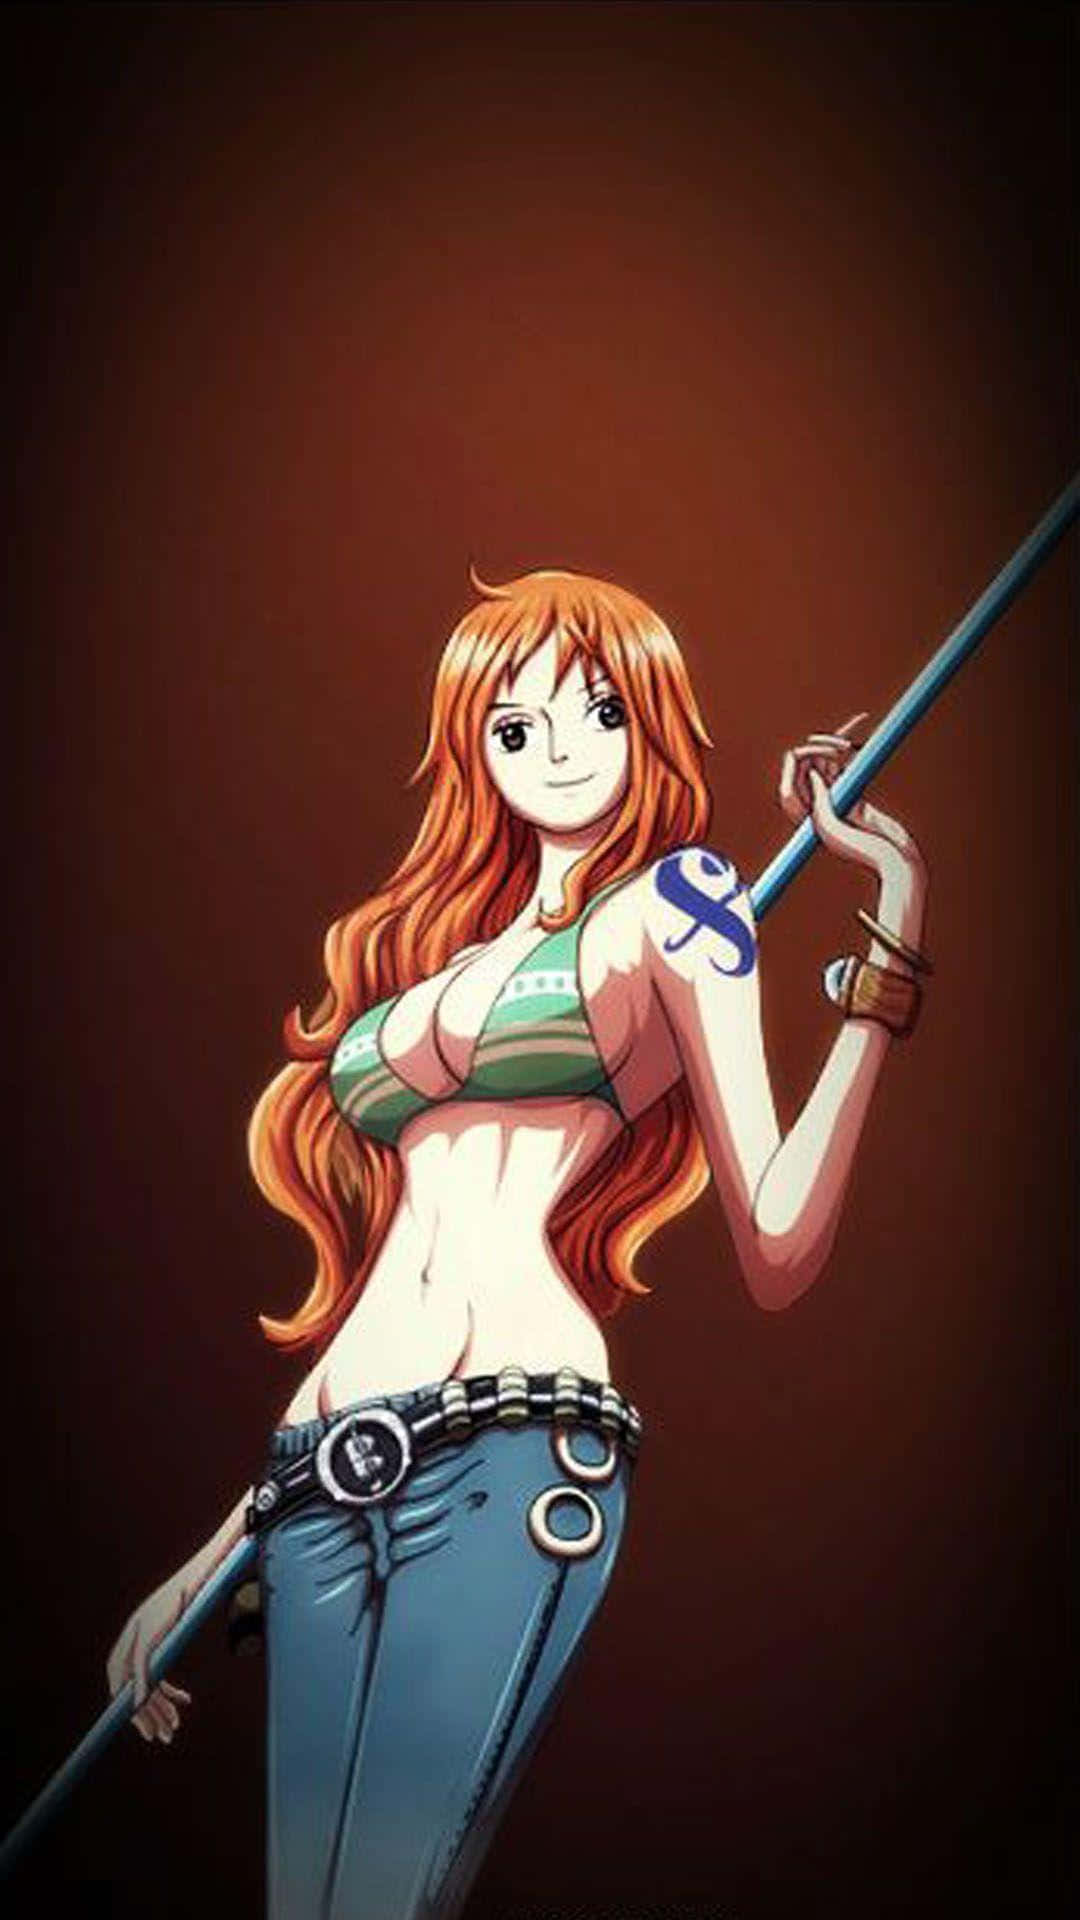 Wallpaper ID 452994  Anime One Piece Phone Wallpaper Nami One Piece  720x1280 free download